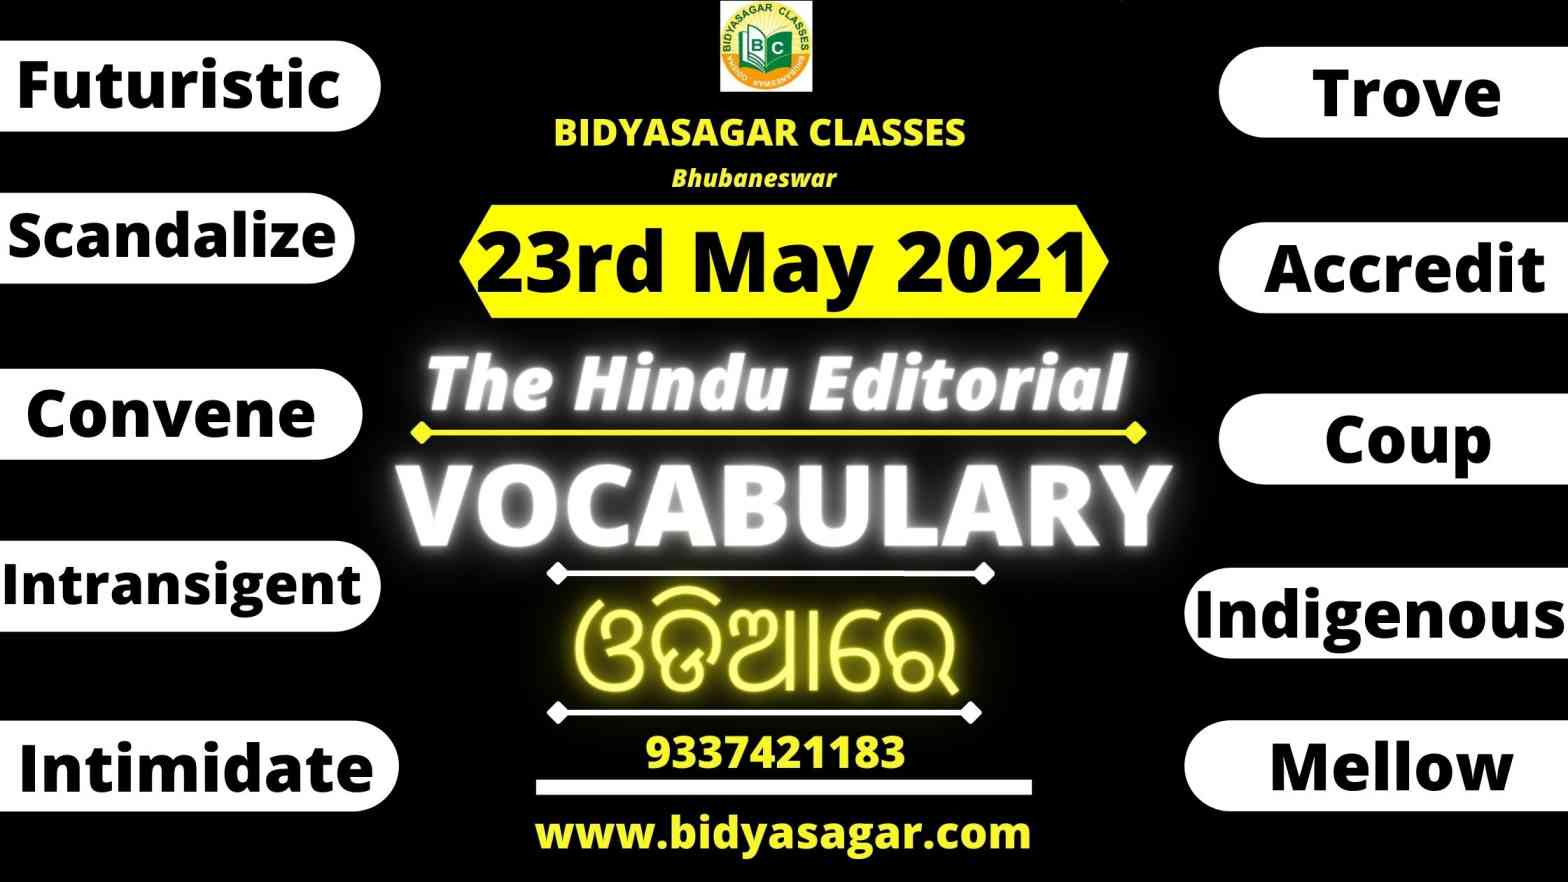 The Hindu Editorial Vocabulary of 23rd May 2021